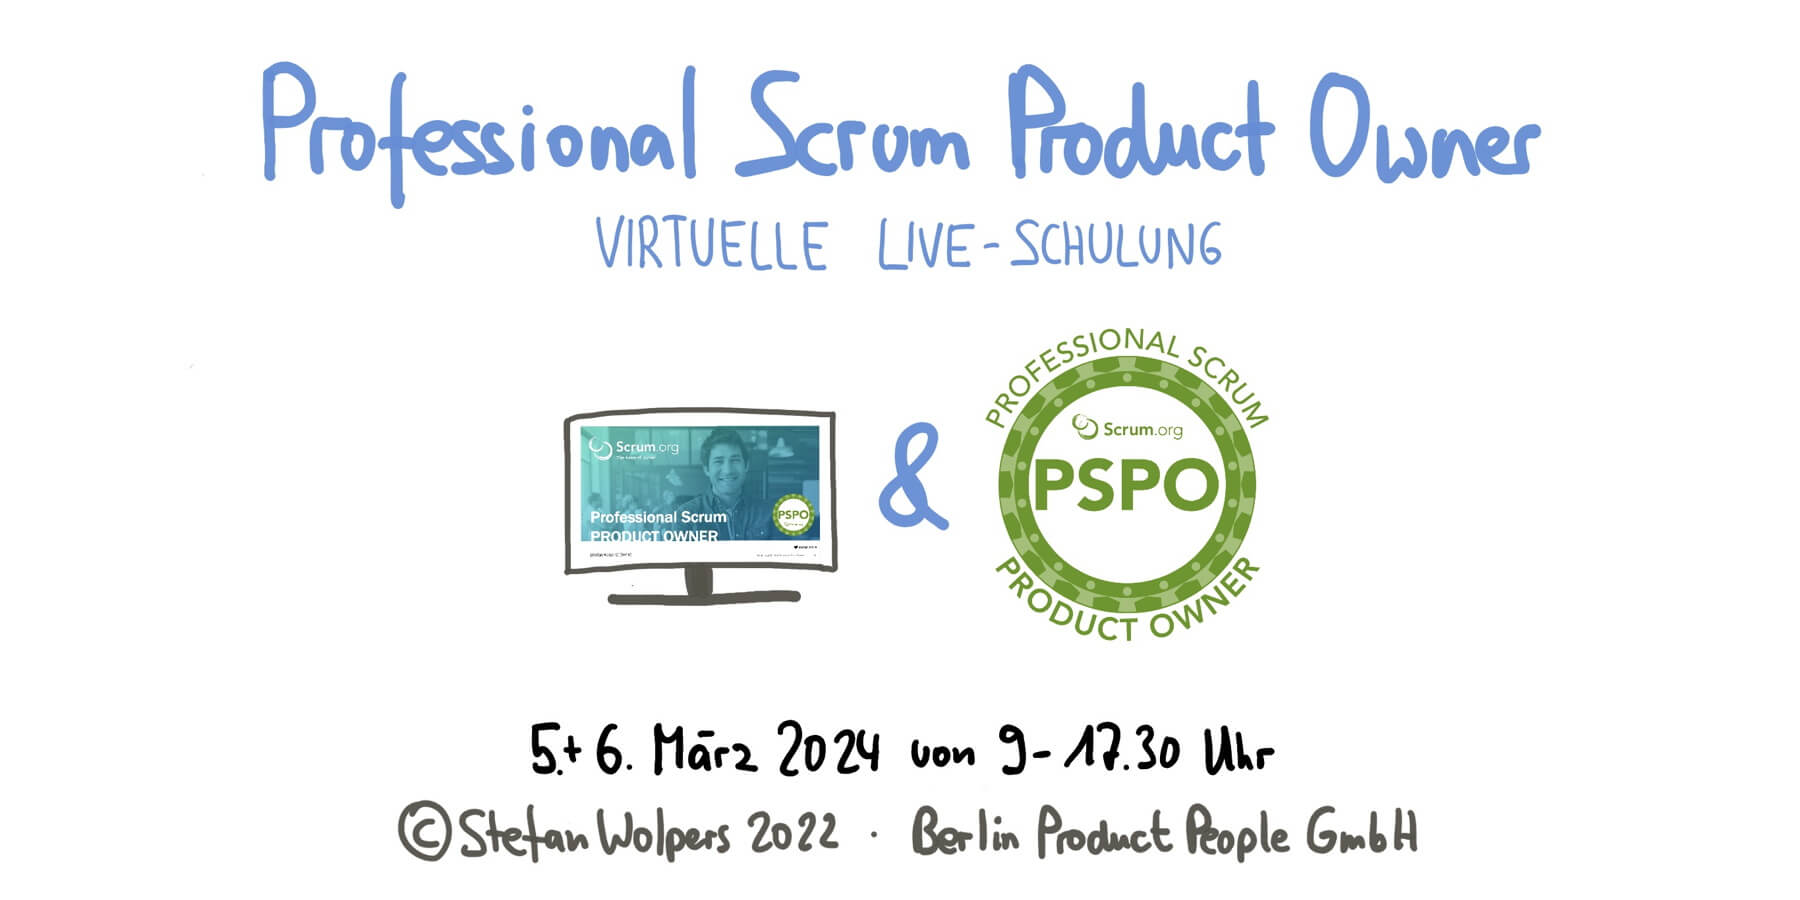 Professional Scrum Product Owner Training w/ PSPO I Certificate of March 5-6, 2024 — Berlin-Product-People.com